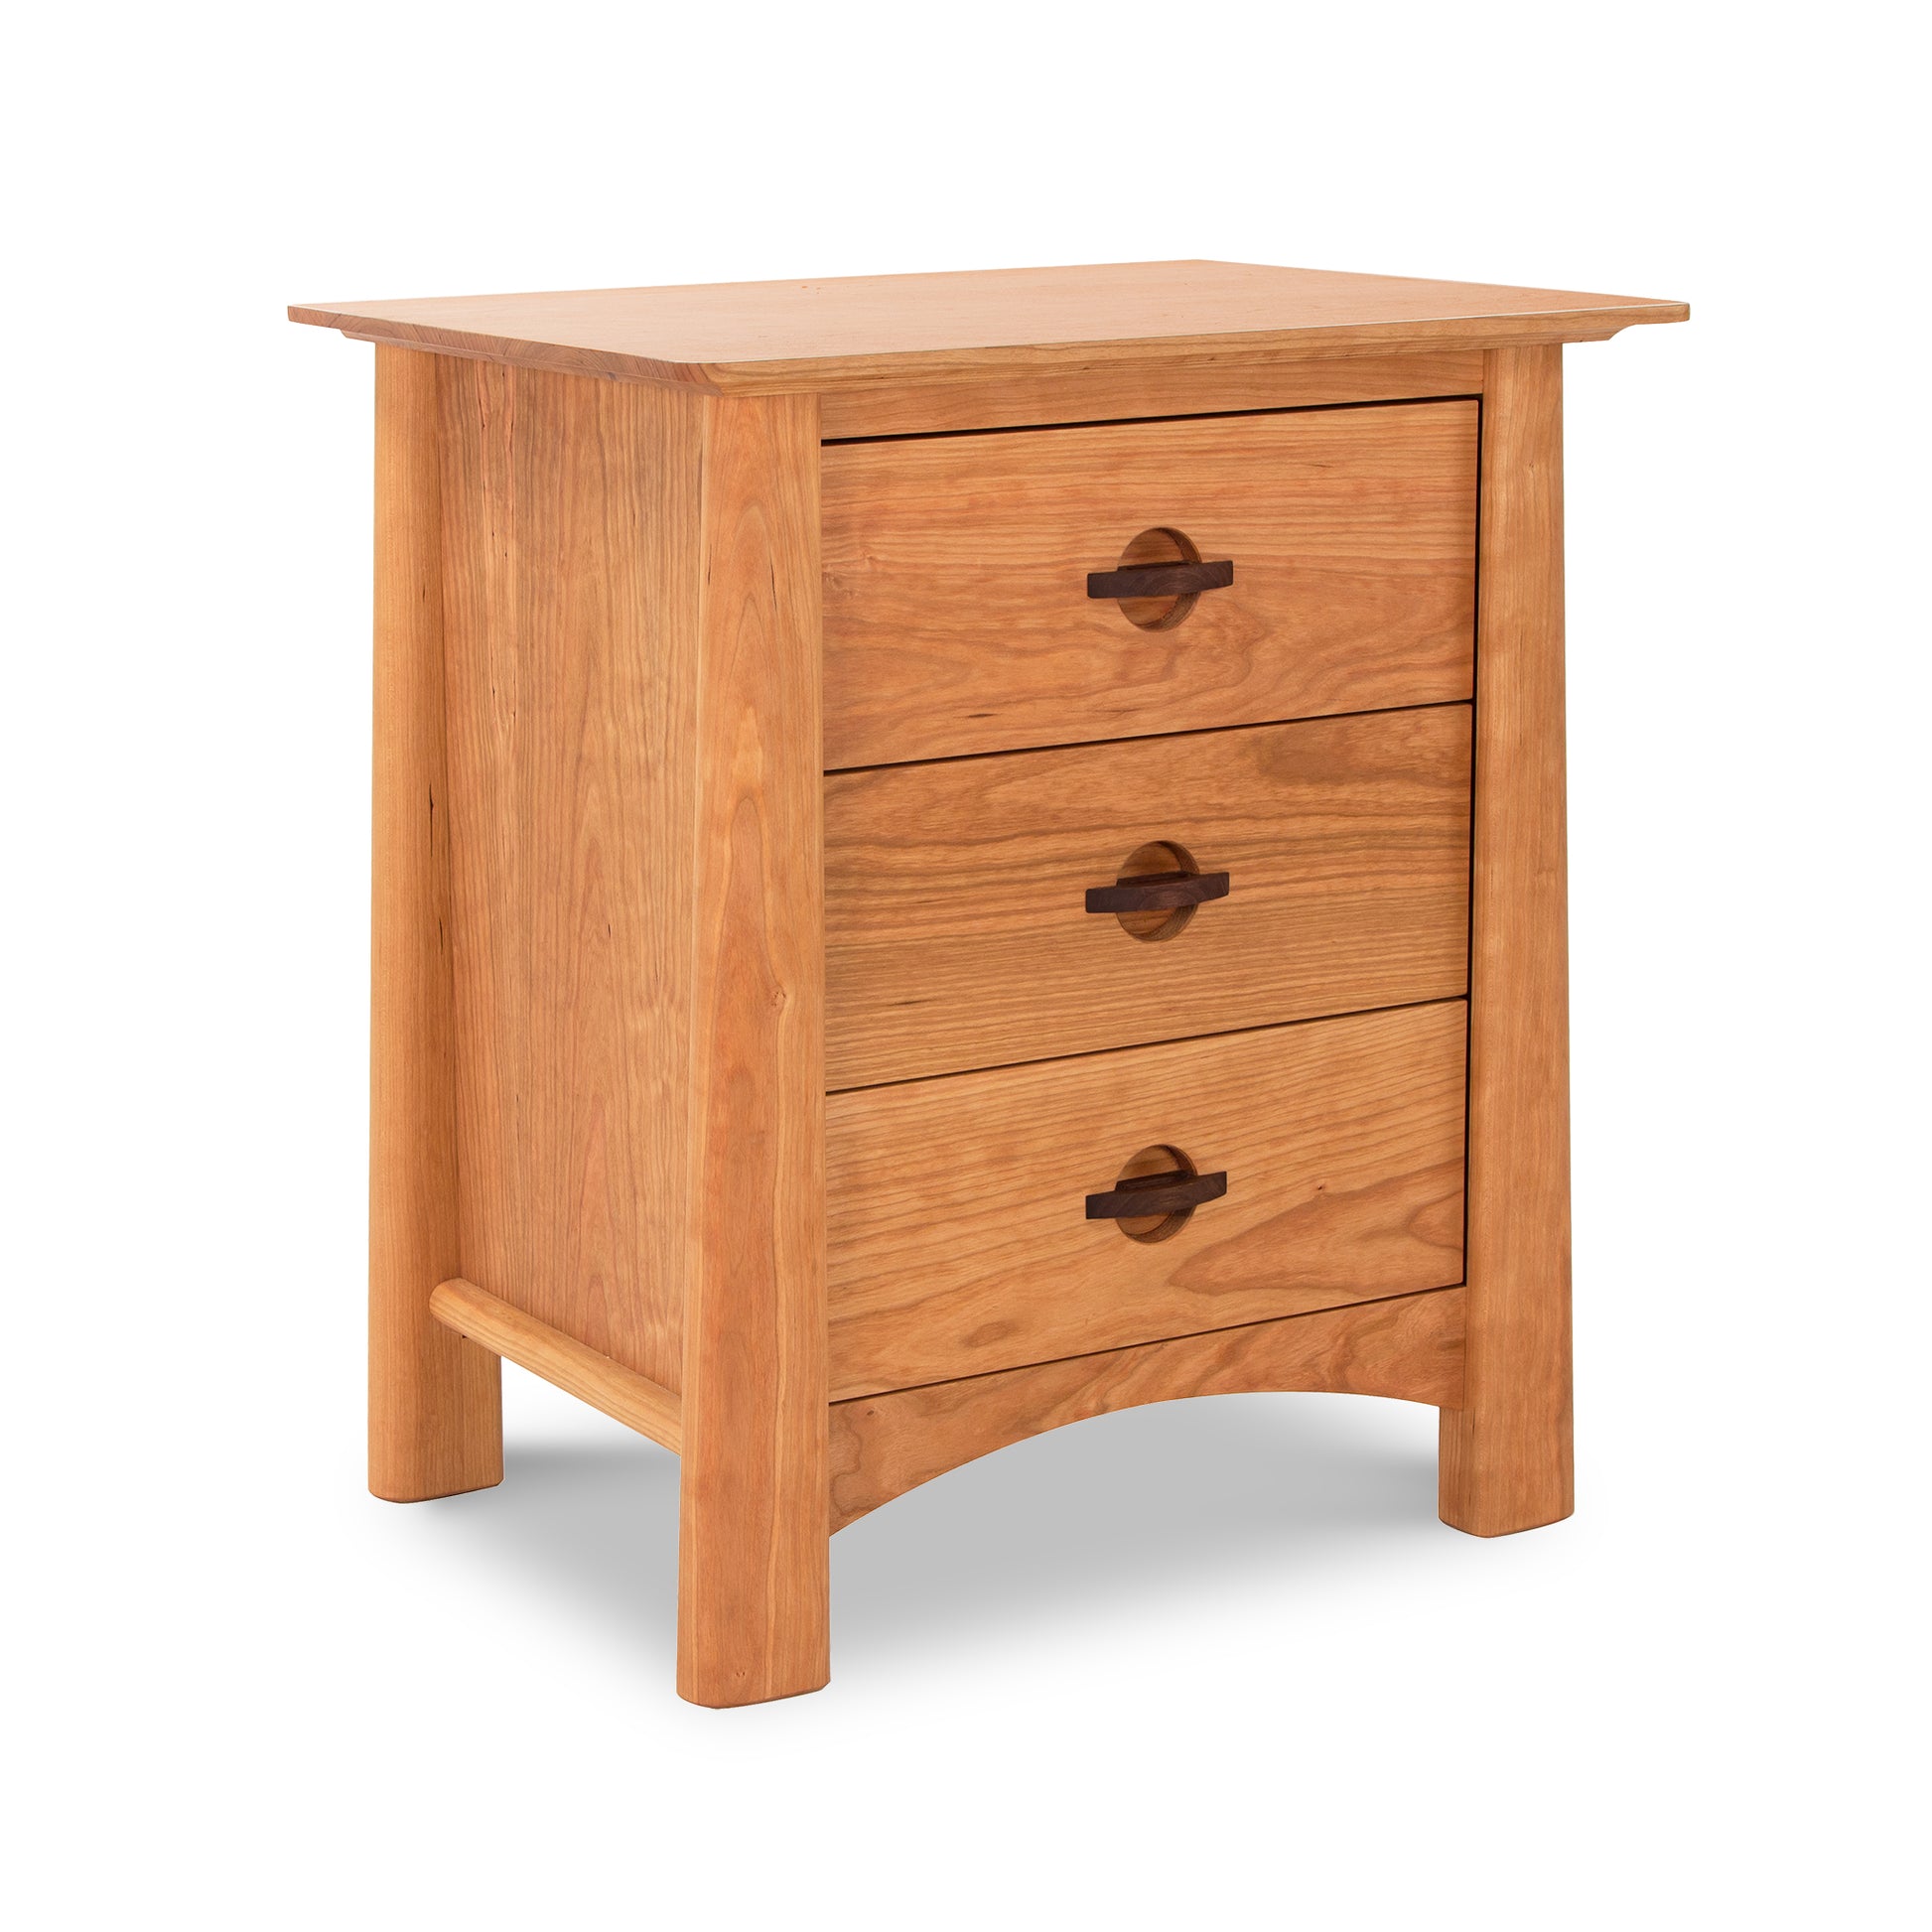 Maple Corner Woodworks' Vermont craftsmanship luxury Cherry Moon 3-Drawer Nightstand isolated on a white background.